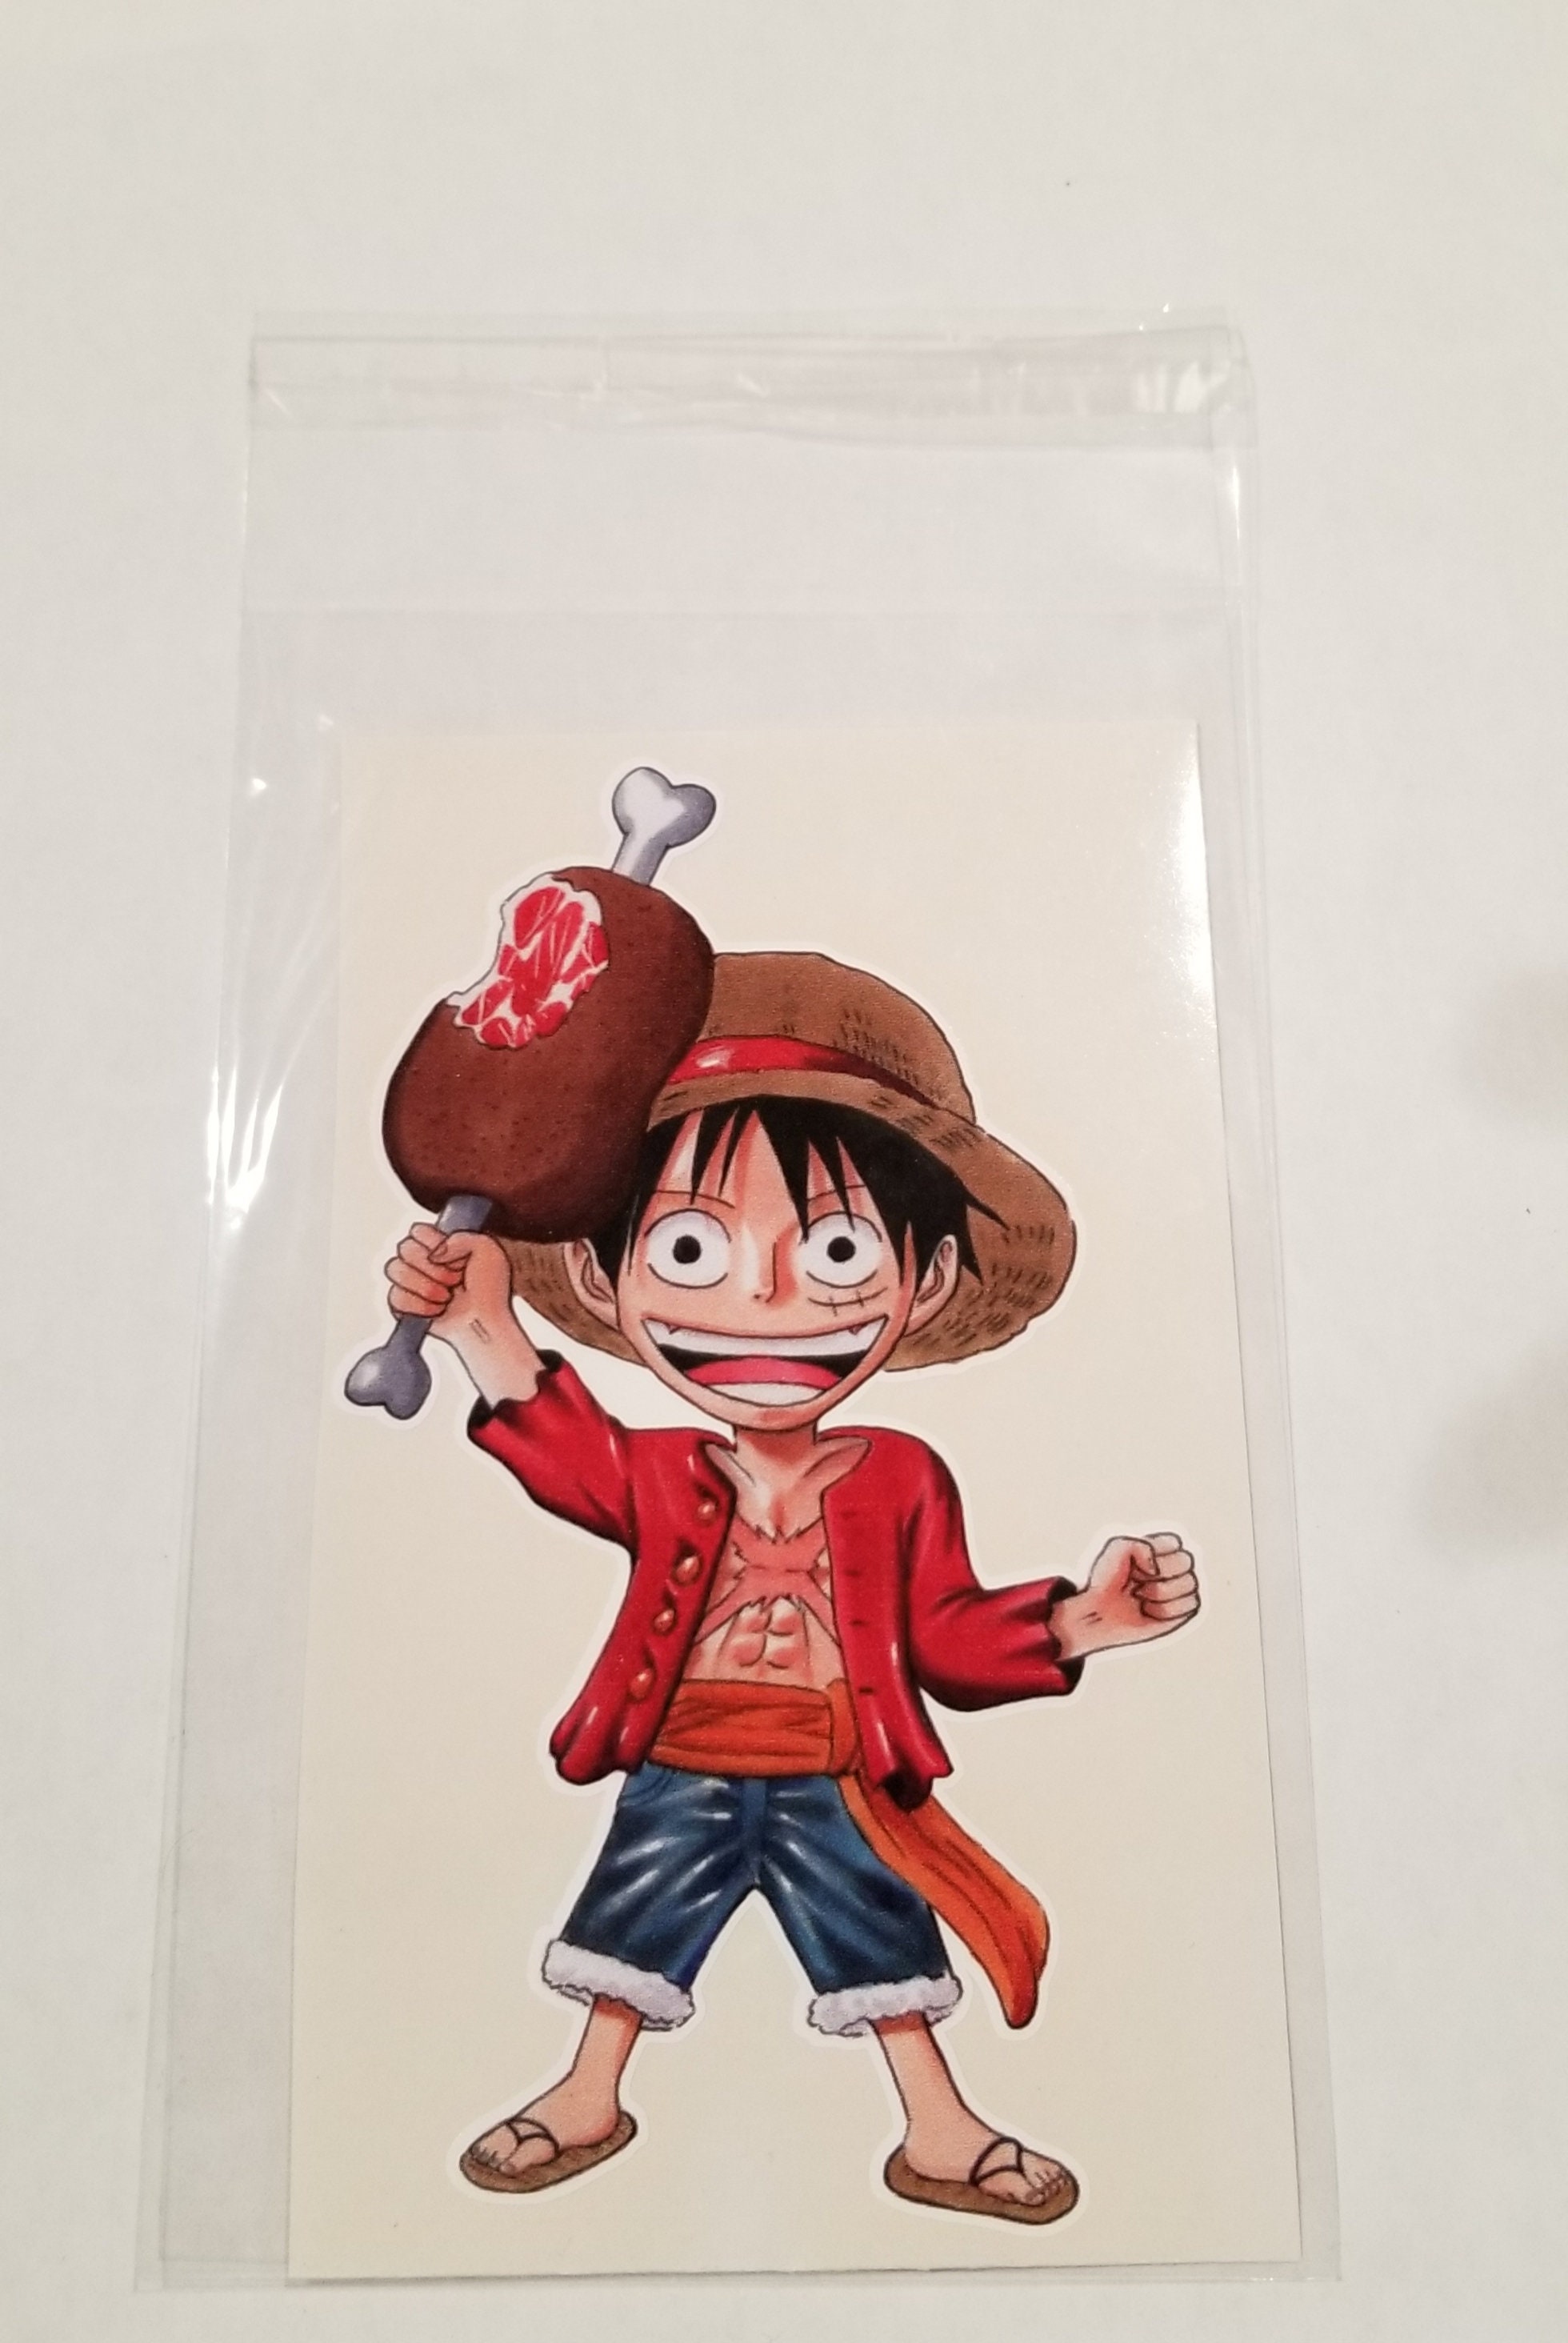 ONE PIECE CHIBI PROJECT on X: Monkey D. Luffy New Card Design